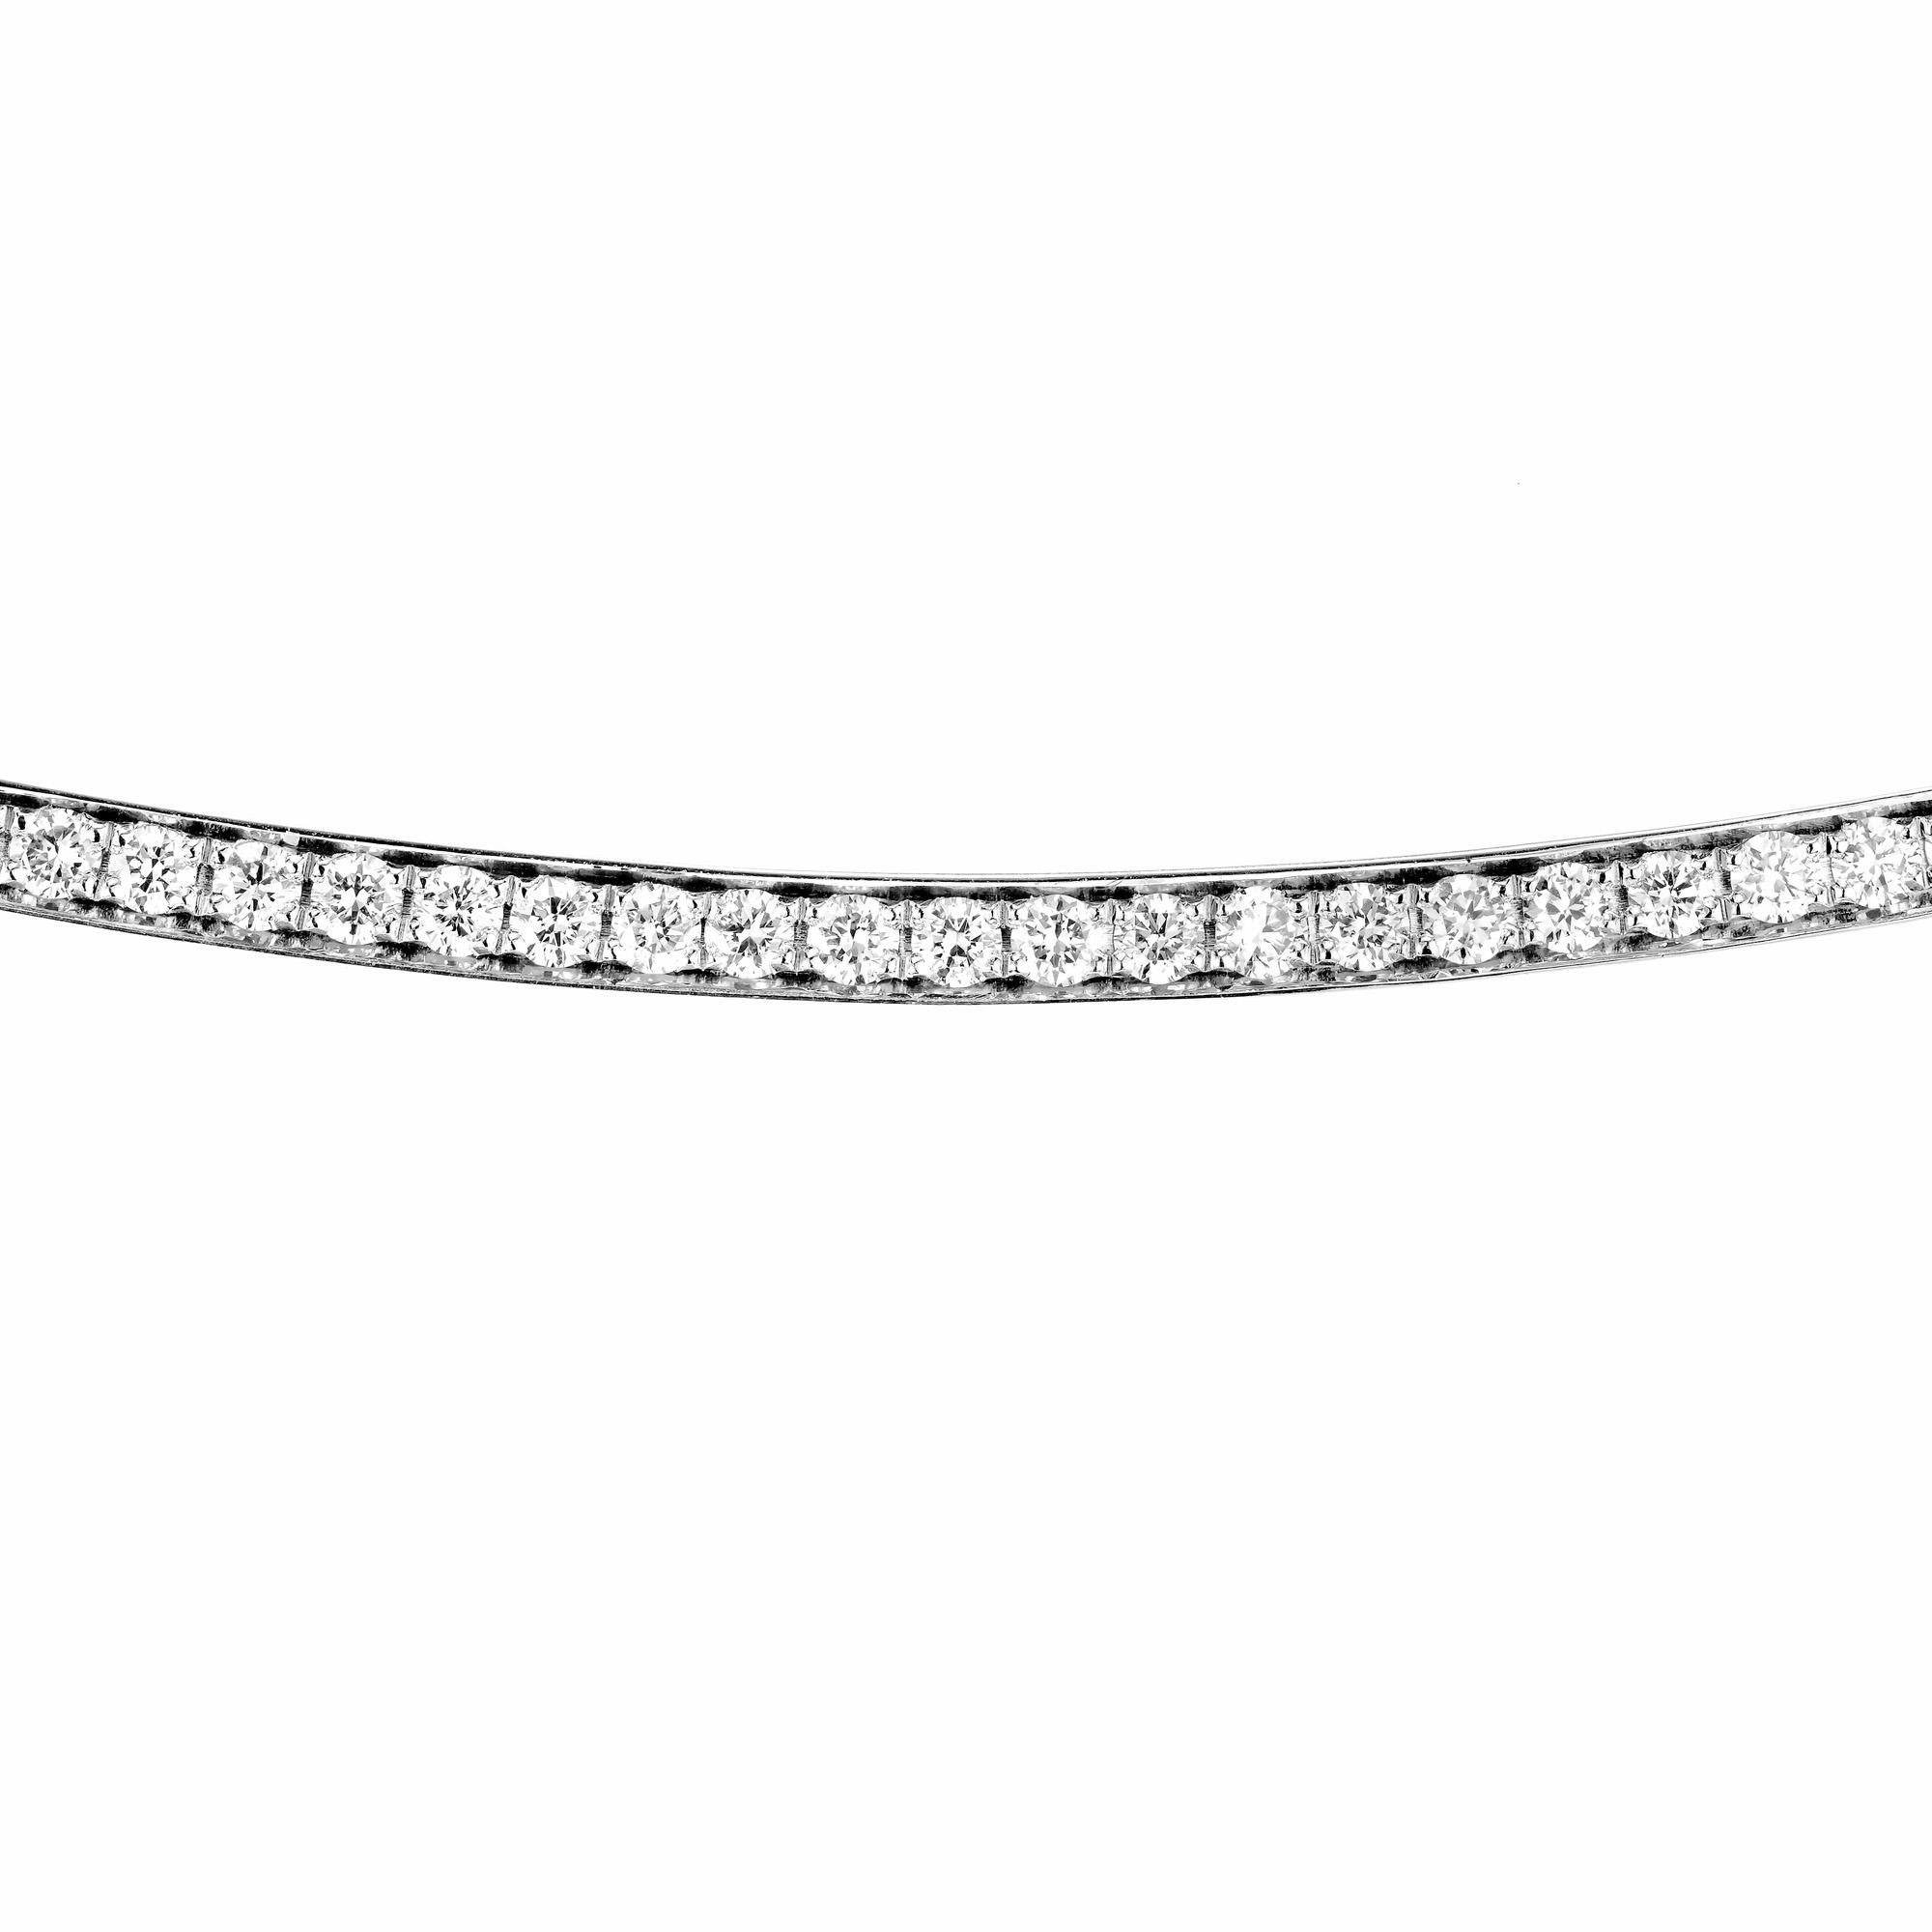 Diamond smile pave set bar necklace. 39 round pave set diamonds totaling .36cts. 18 inch 14k white gold chain. Also available in platinum and yellow gold. Adjustable 16.5 to 18 Inches. Designed and crafted in the Peter Suchy workshop

39 round